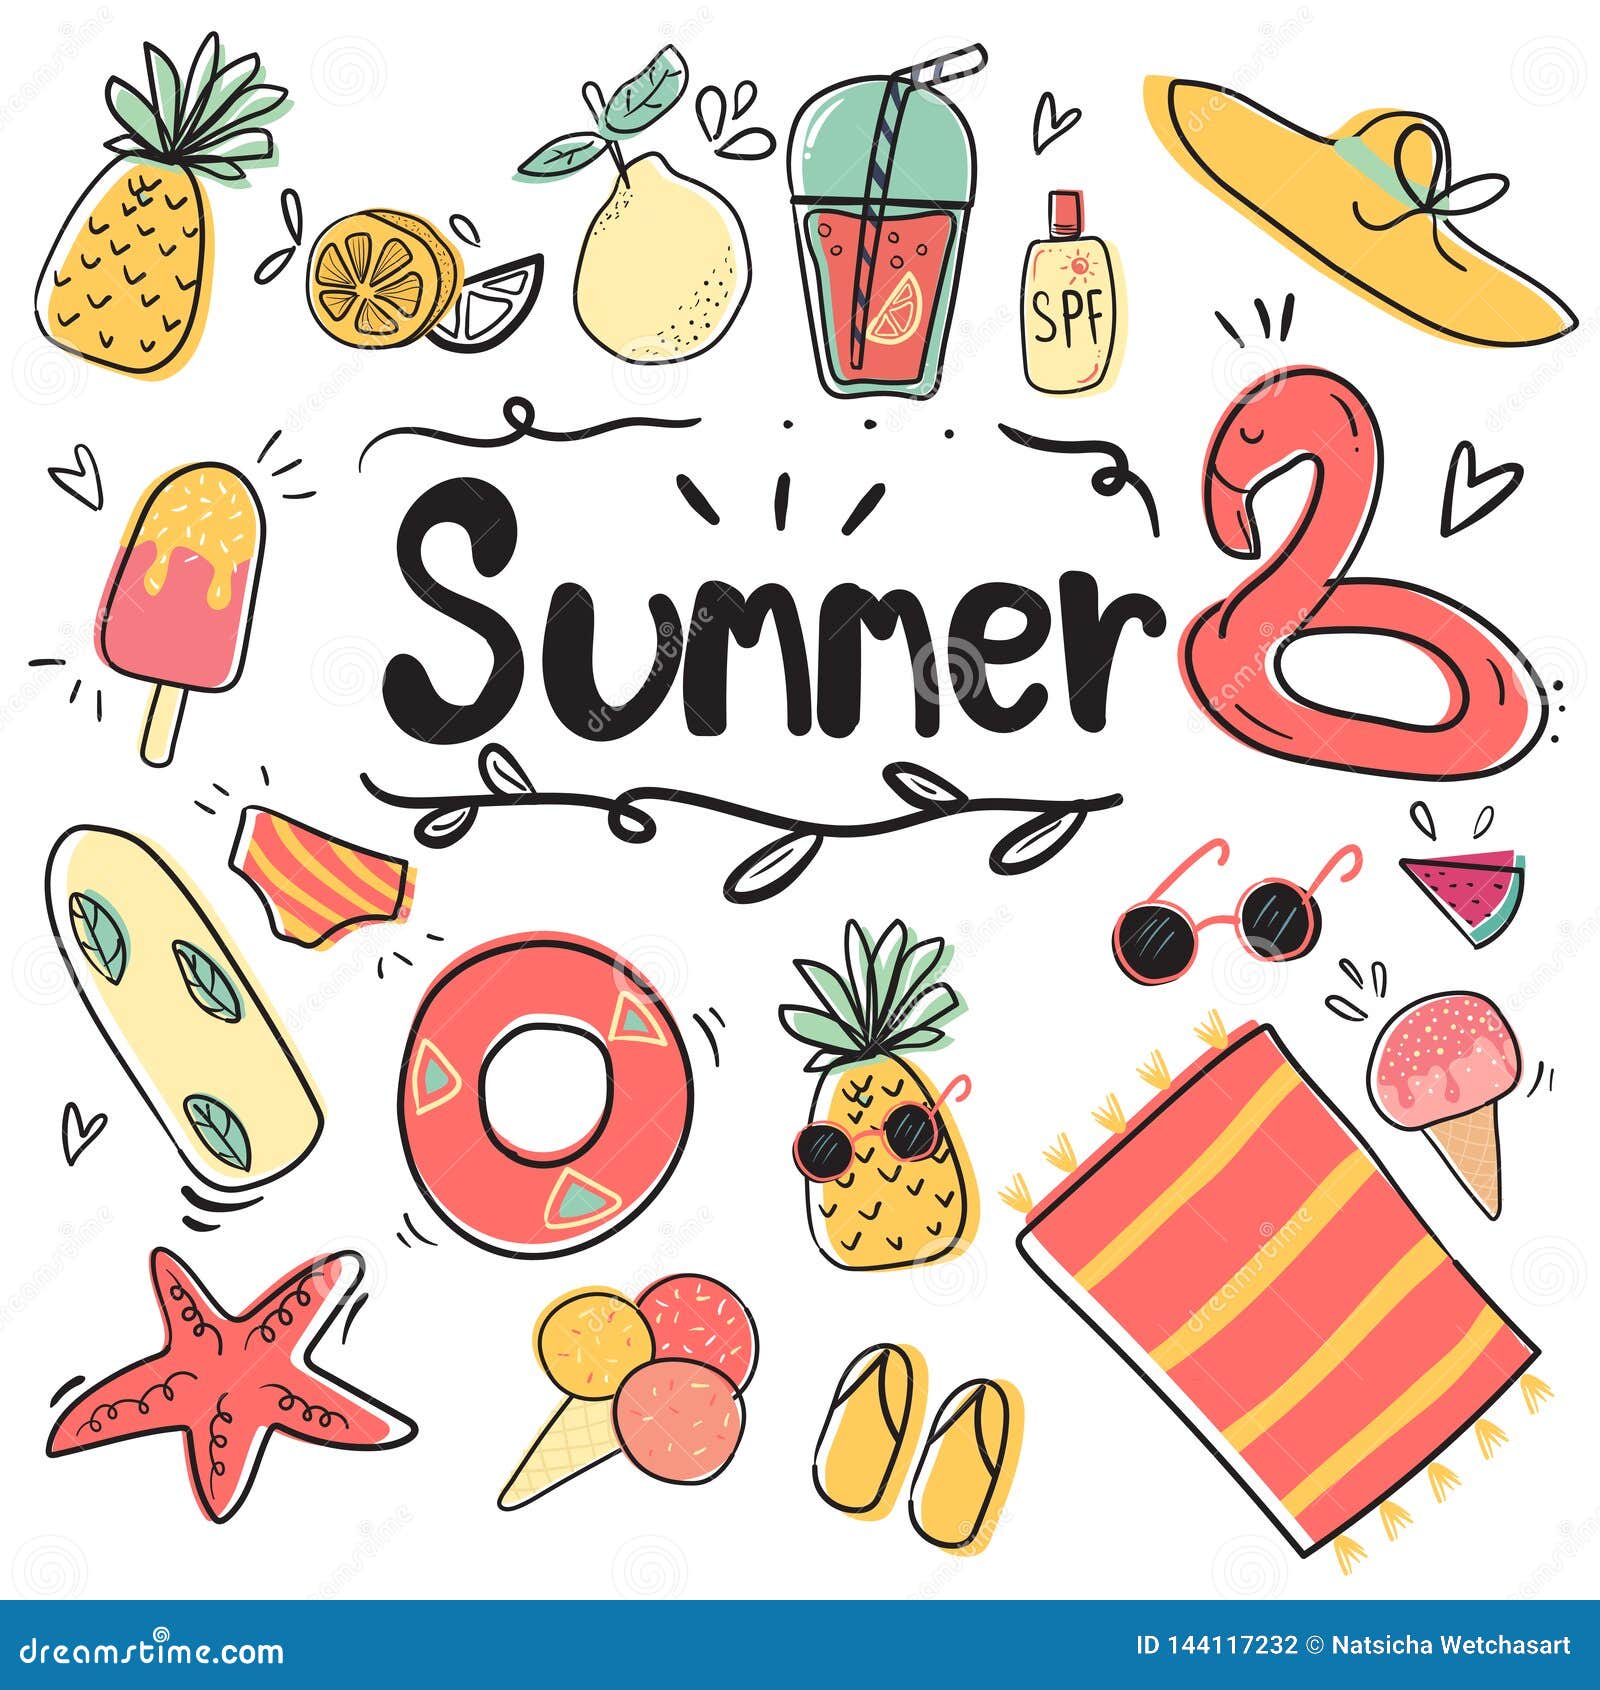 Summer Drawing Ideas #summervibes - Musely